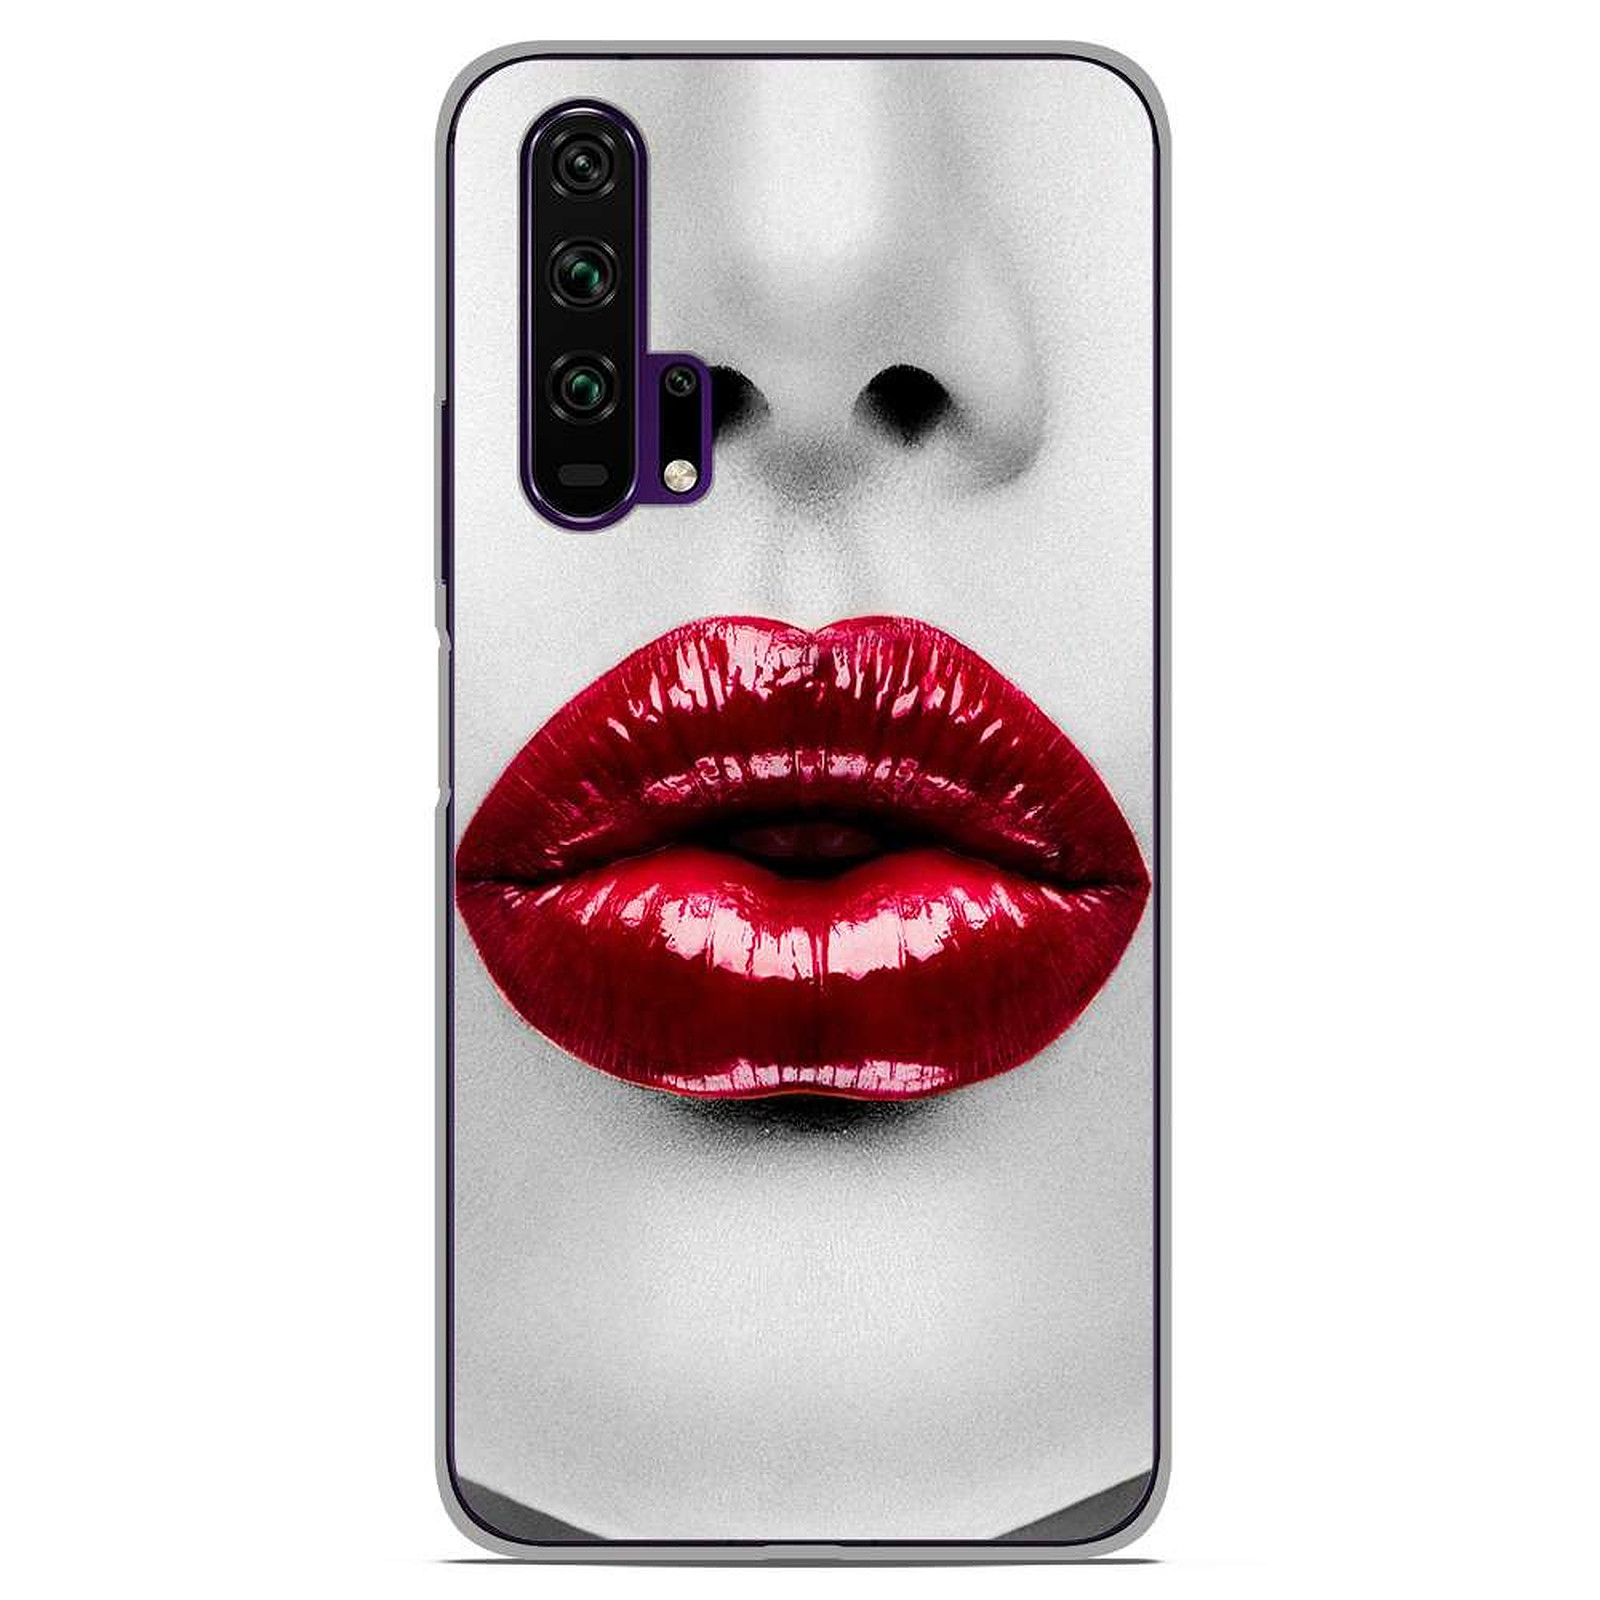 1001 Coques Coque silicone gel Huawei Honor 20 Pro motif Lèvres Rouges - Coque telephone 1001Coques